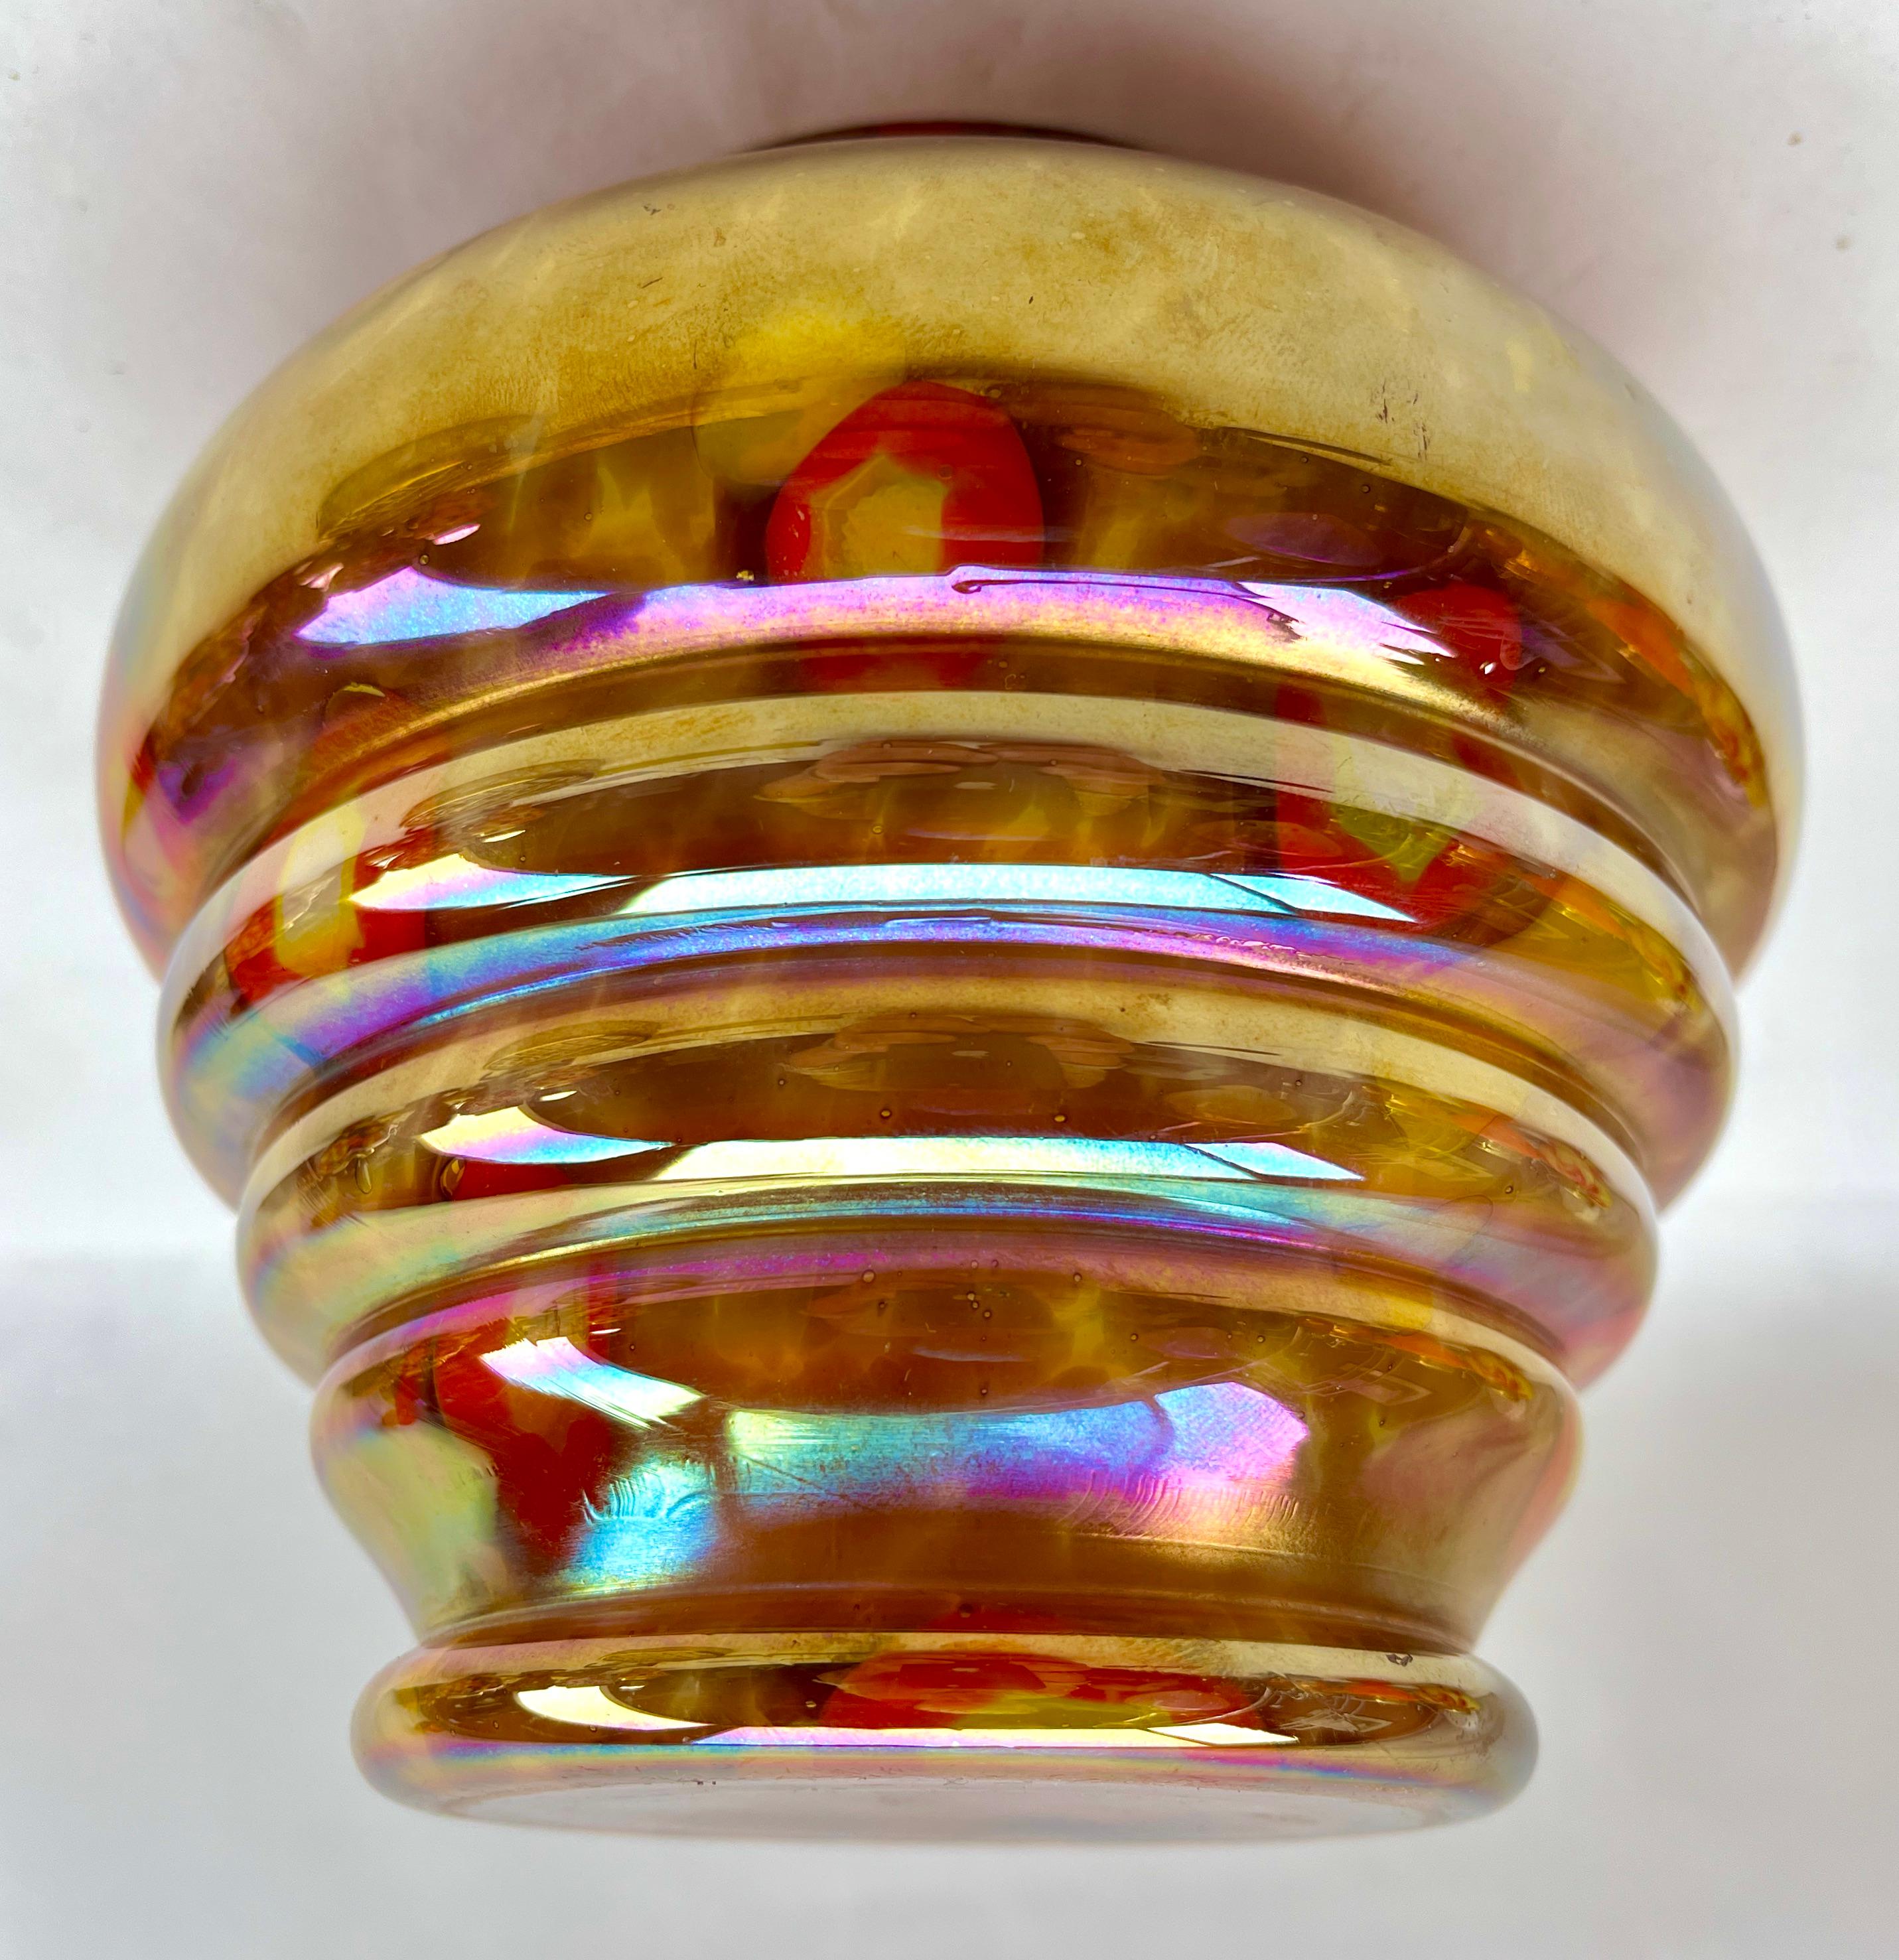 'Pique Fleurs' Iridescent Glass Vase, in Multi Color Decor with Grille, 1930s  For Sale 2